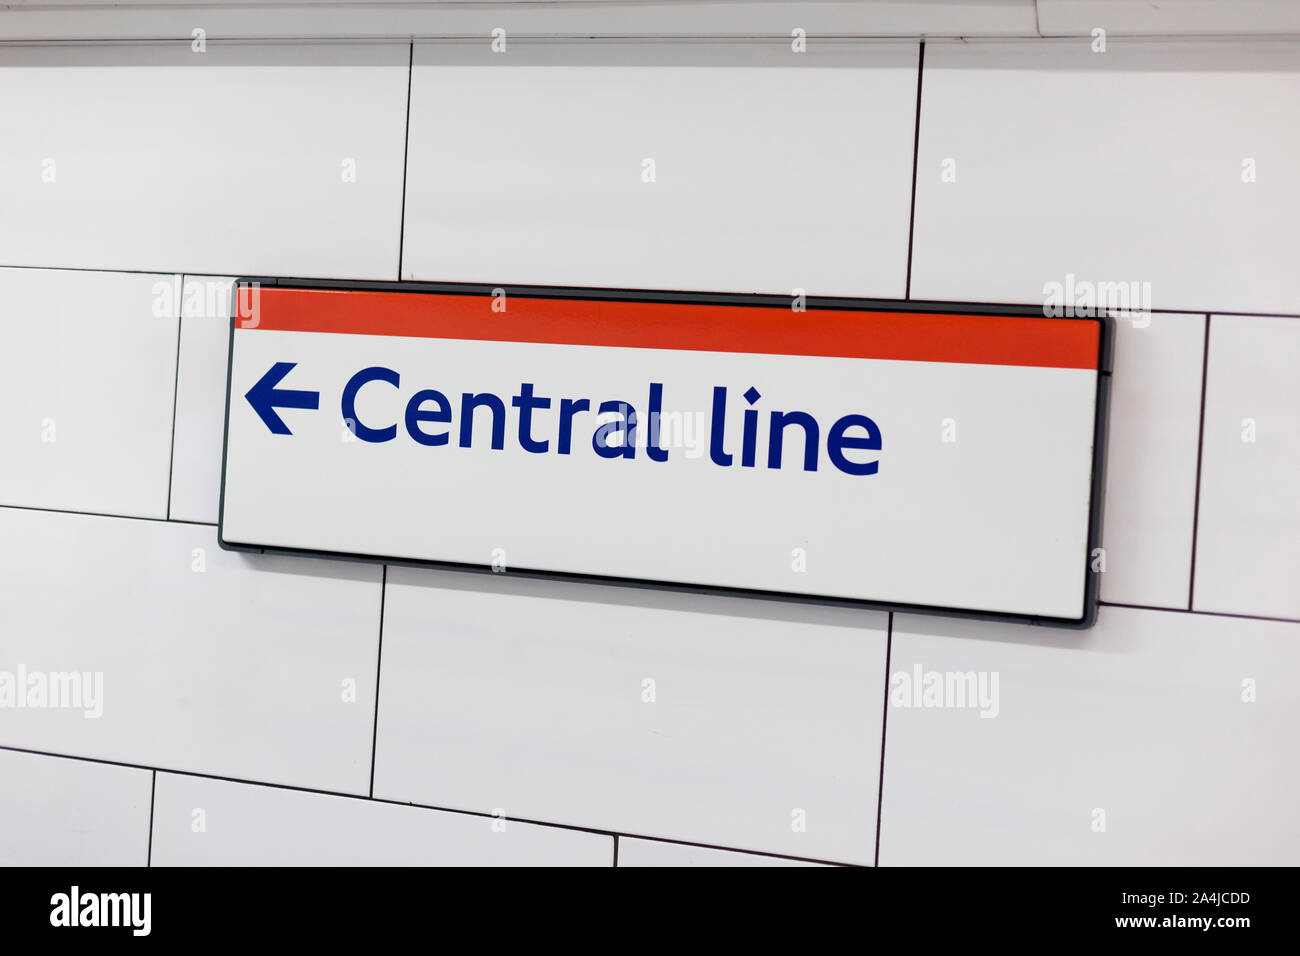 Central line sign, London, UK Stock Photo